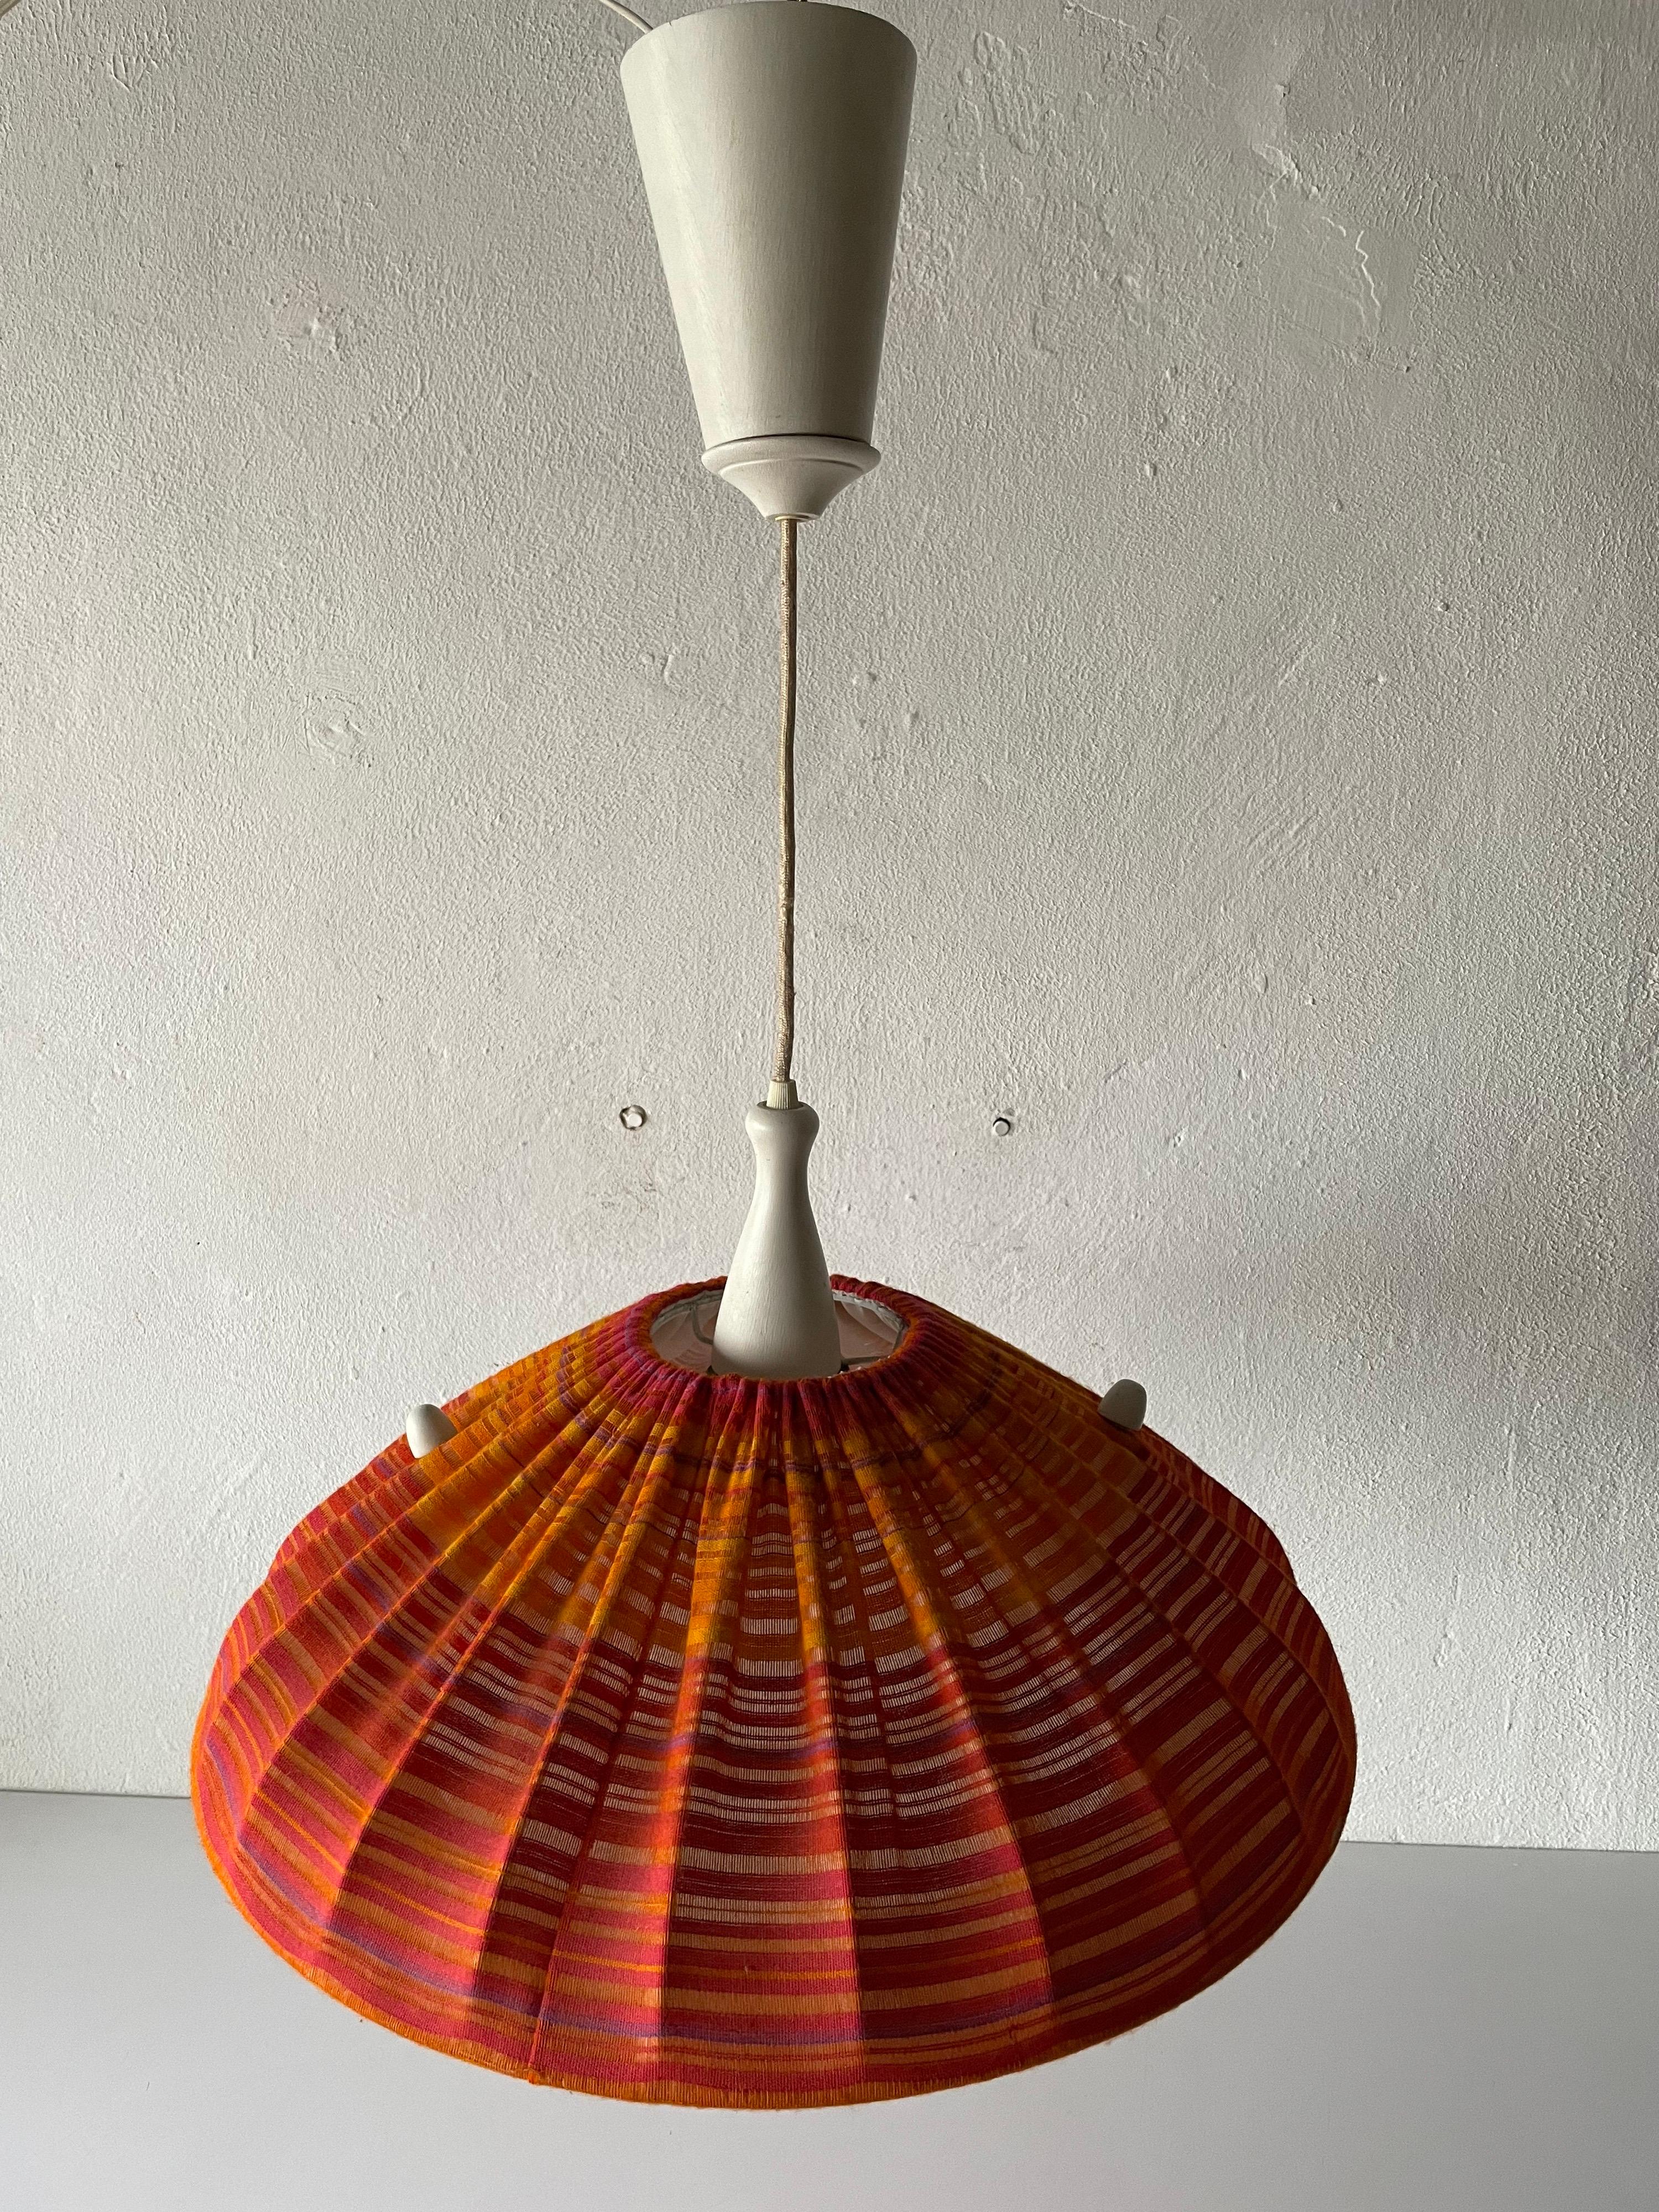 Fabric Shade & Wood Large Pendant Lamp by Temde, 1960s, Germany For Sale 1